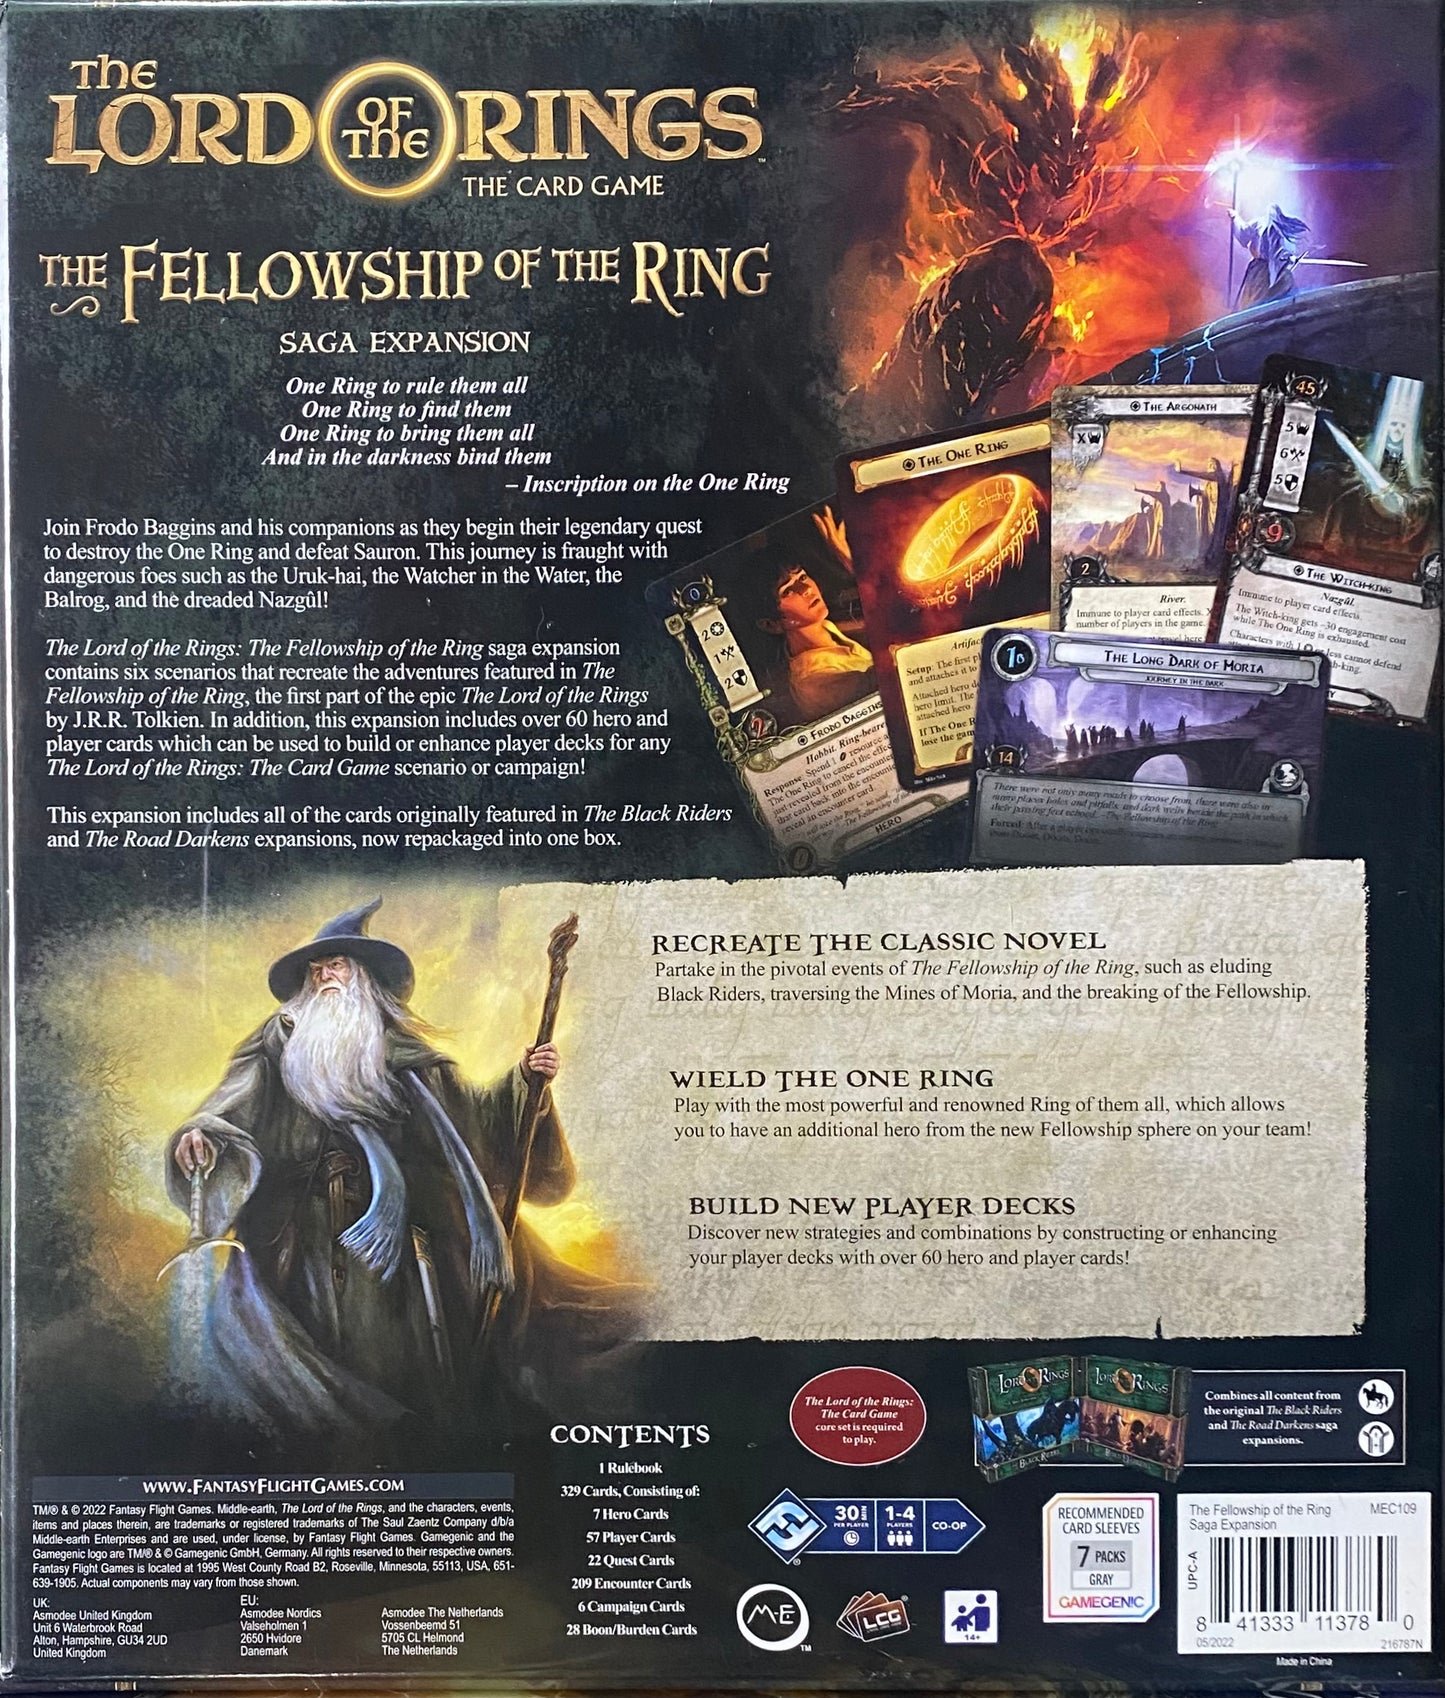 The Lord of the Rings: The Card Game – The Fellowship of the Ring: Saga Expansion